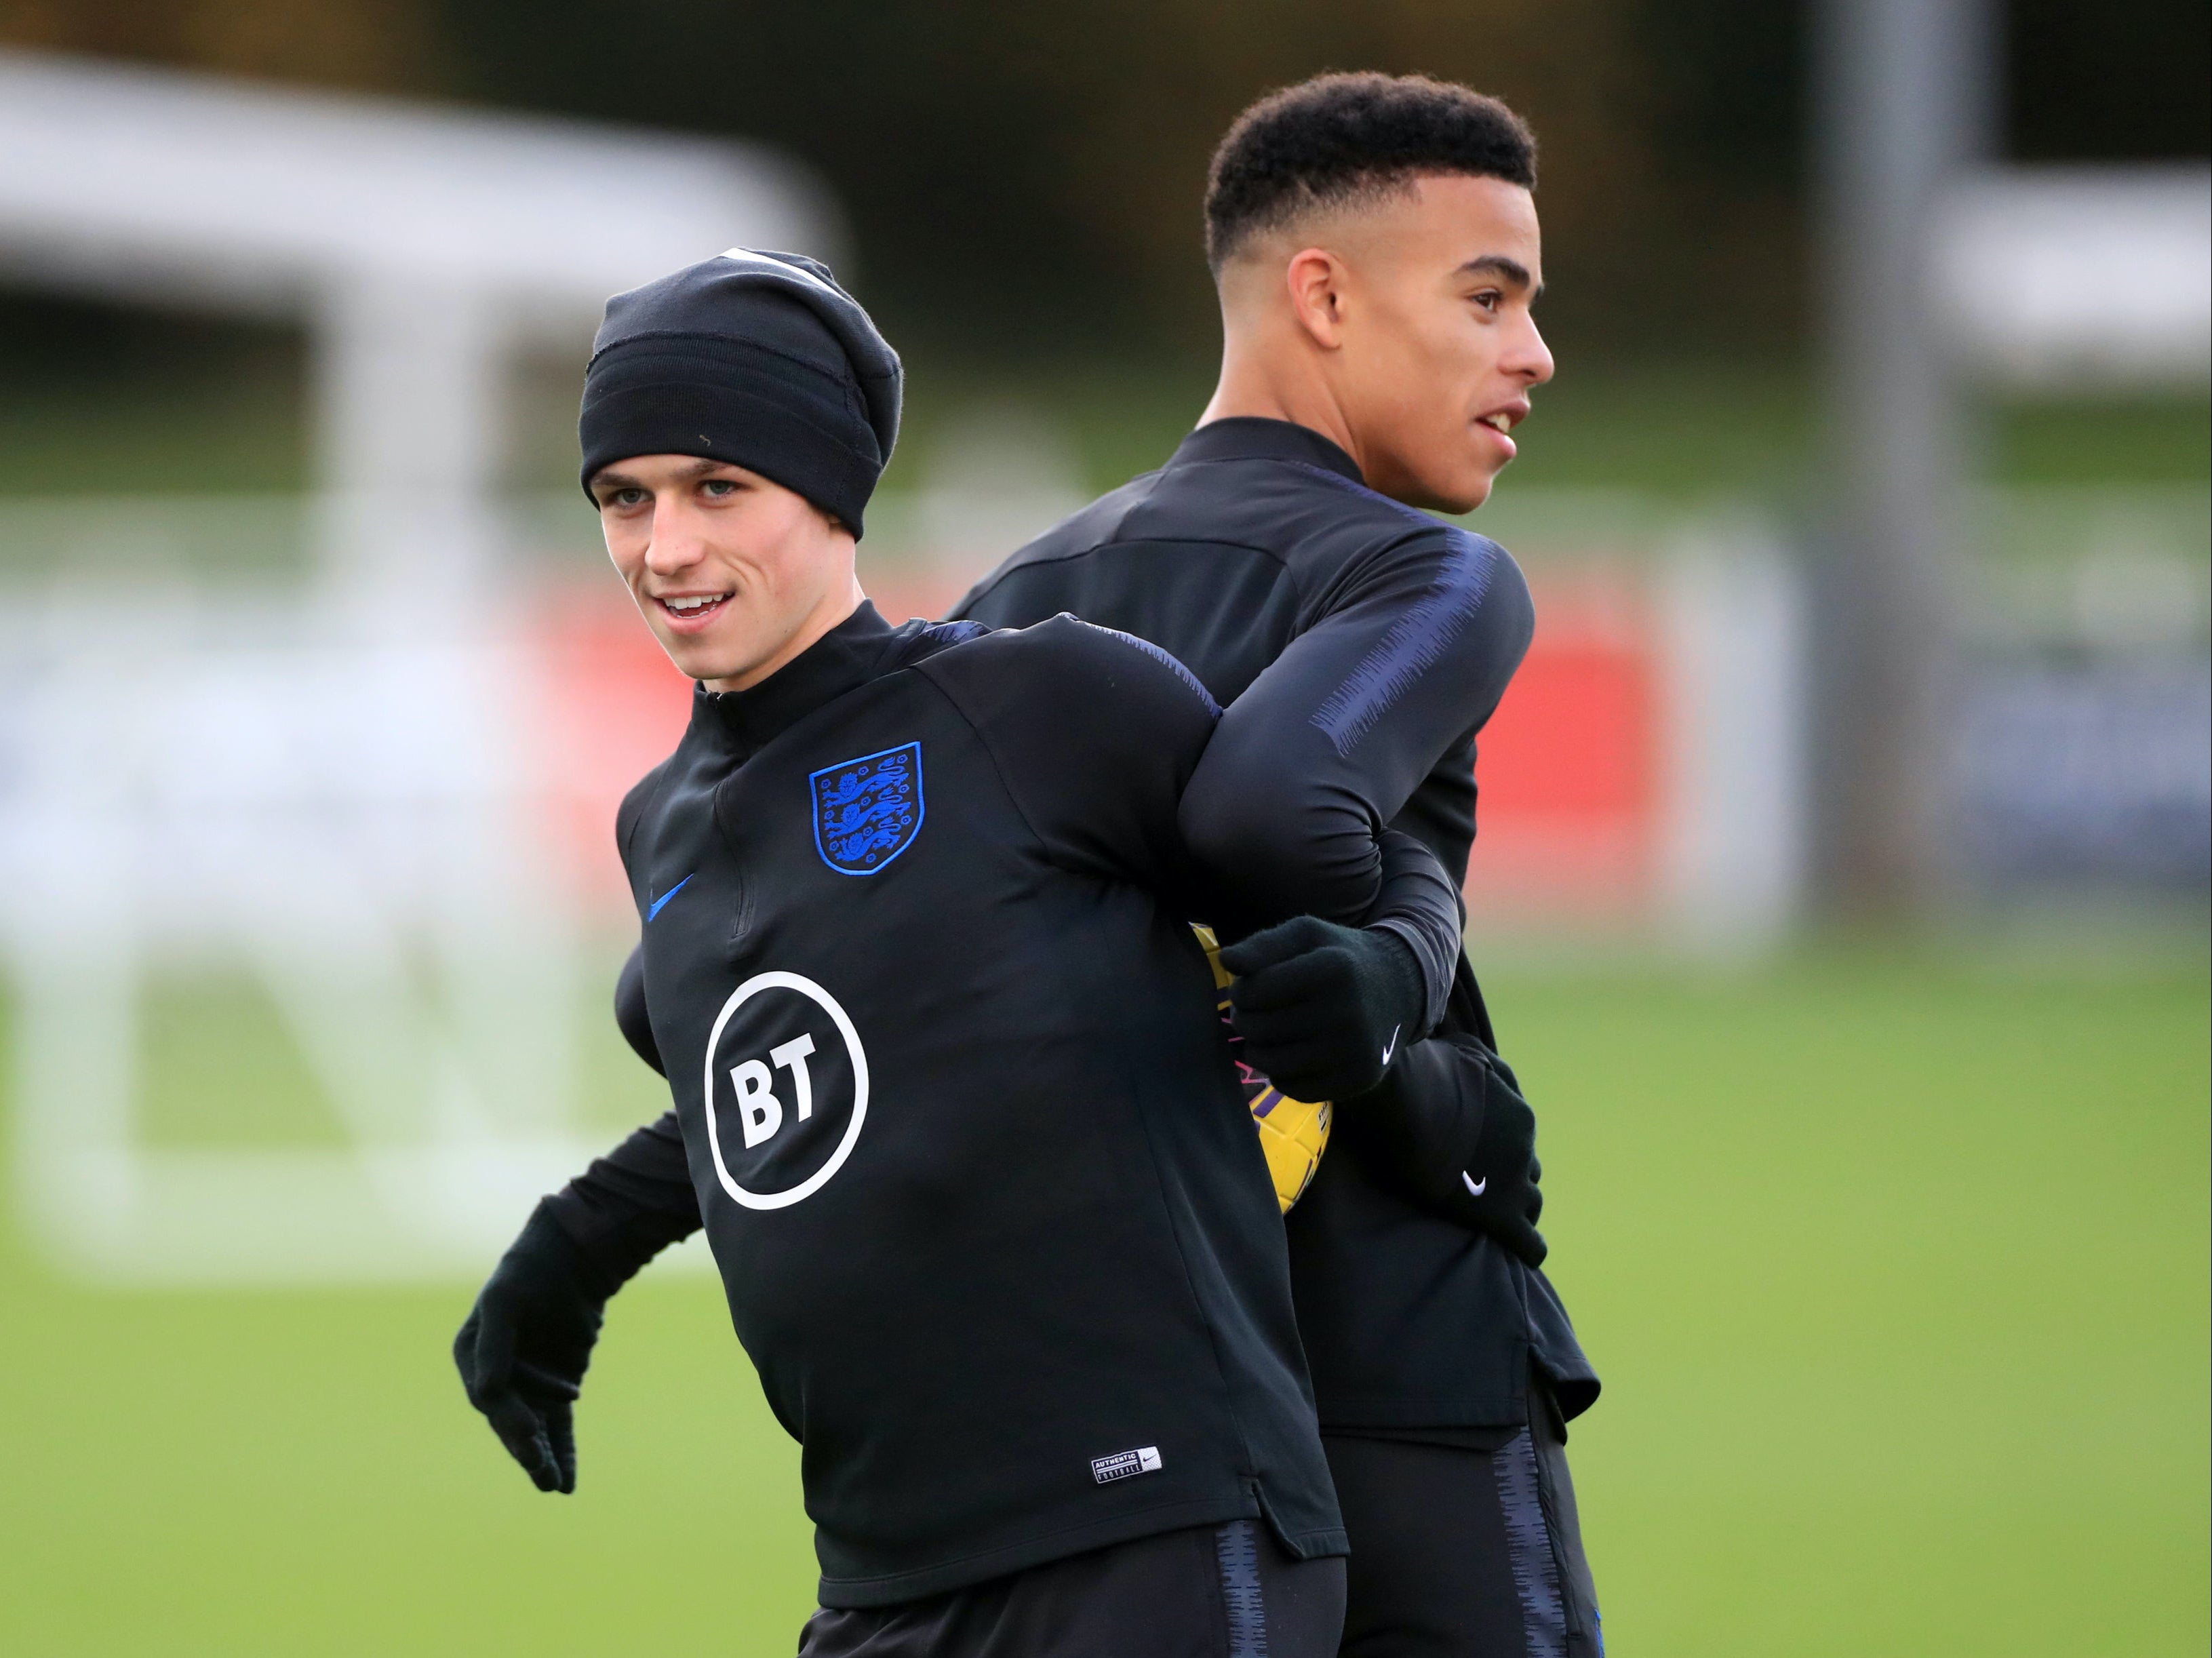 England players Phil Foden and Mason Greenwood